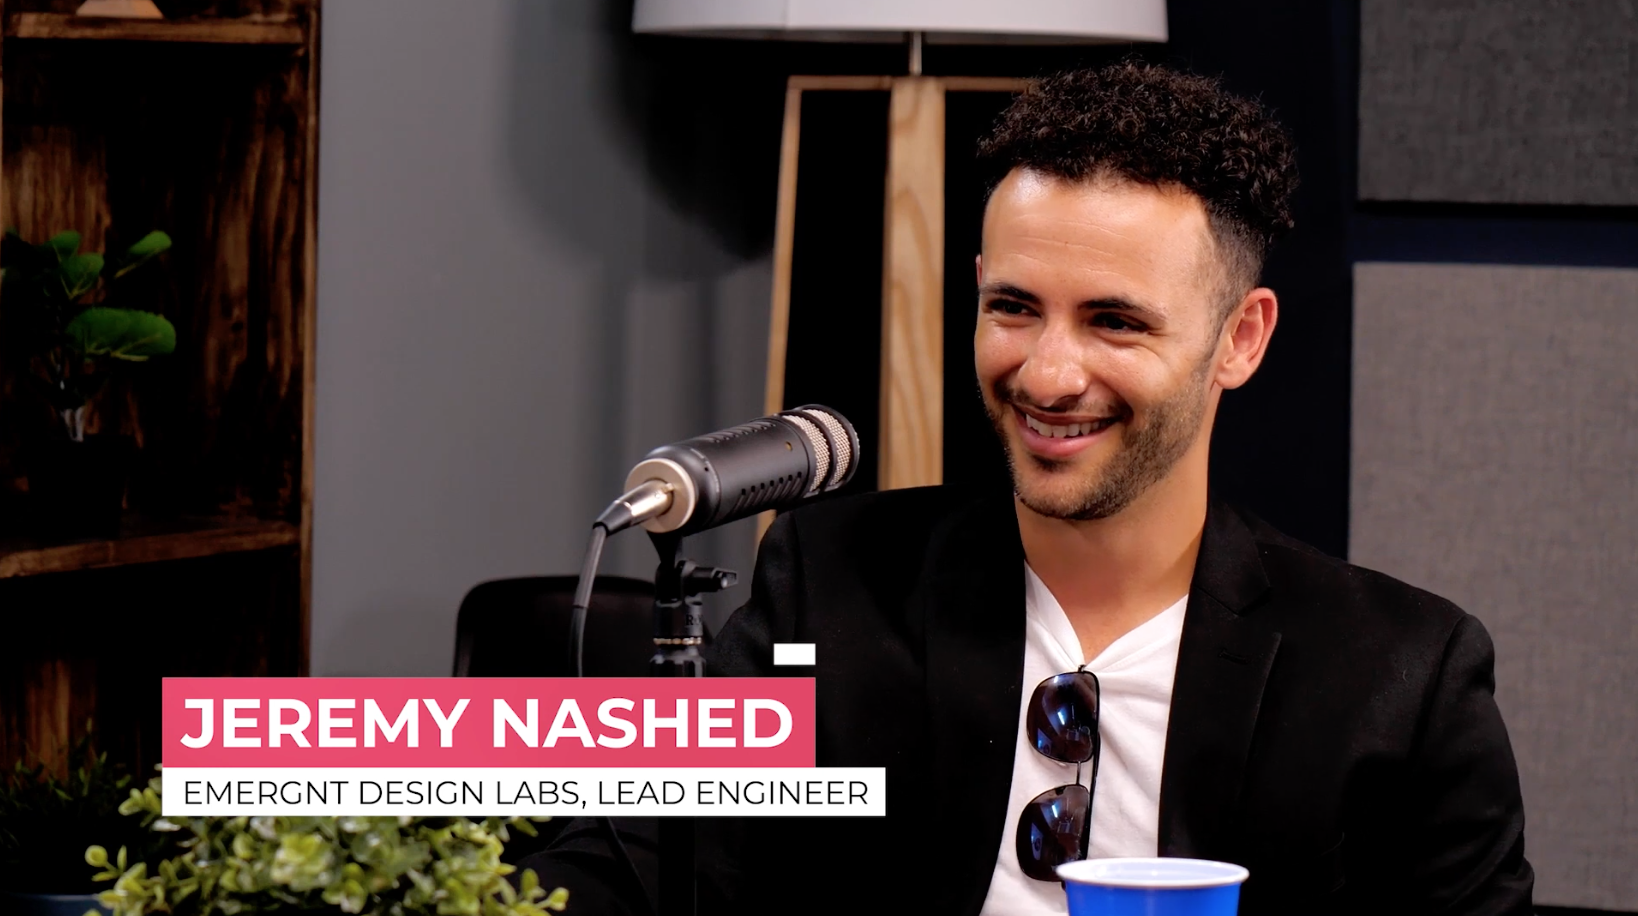 The Law of Relevancy with Jeremy Nashed, Lead Engineer at Emergnt Design Labs